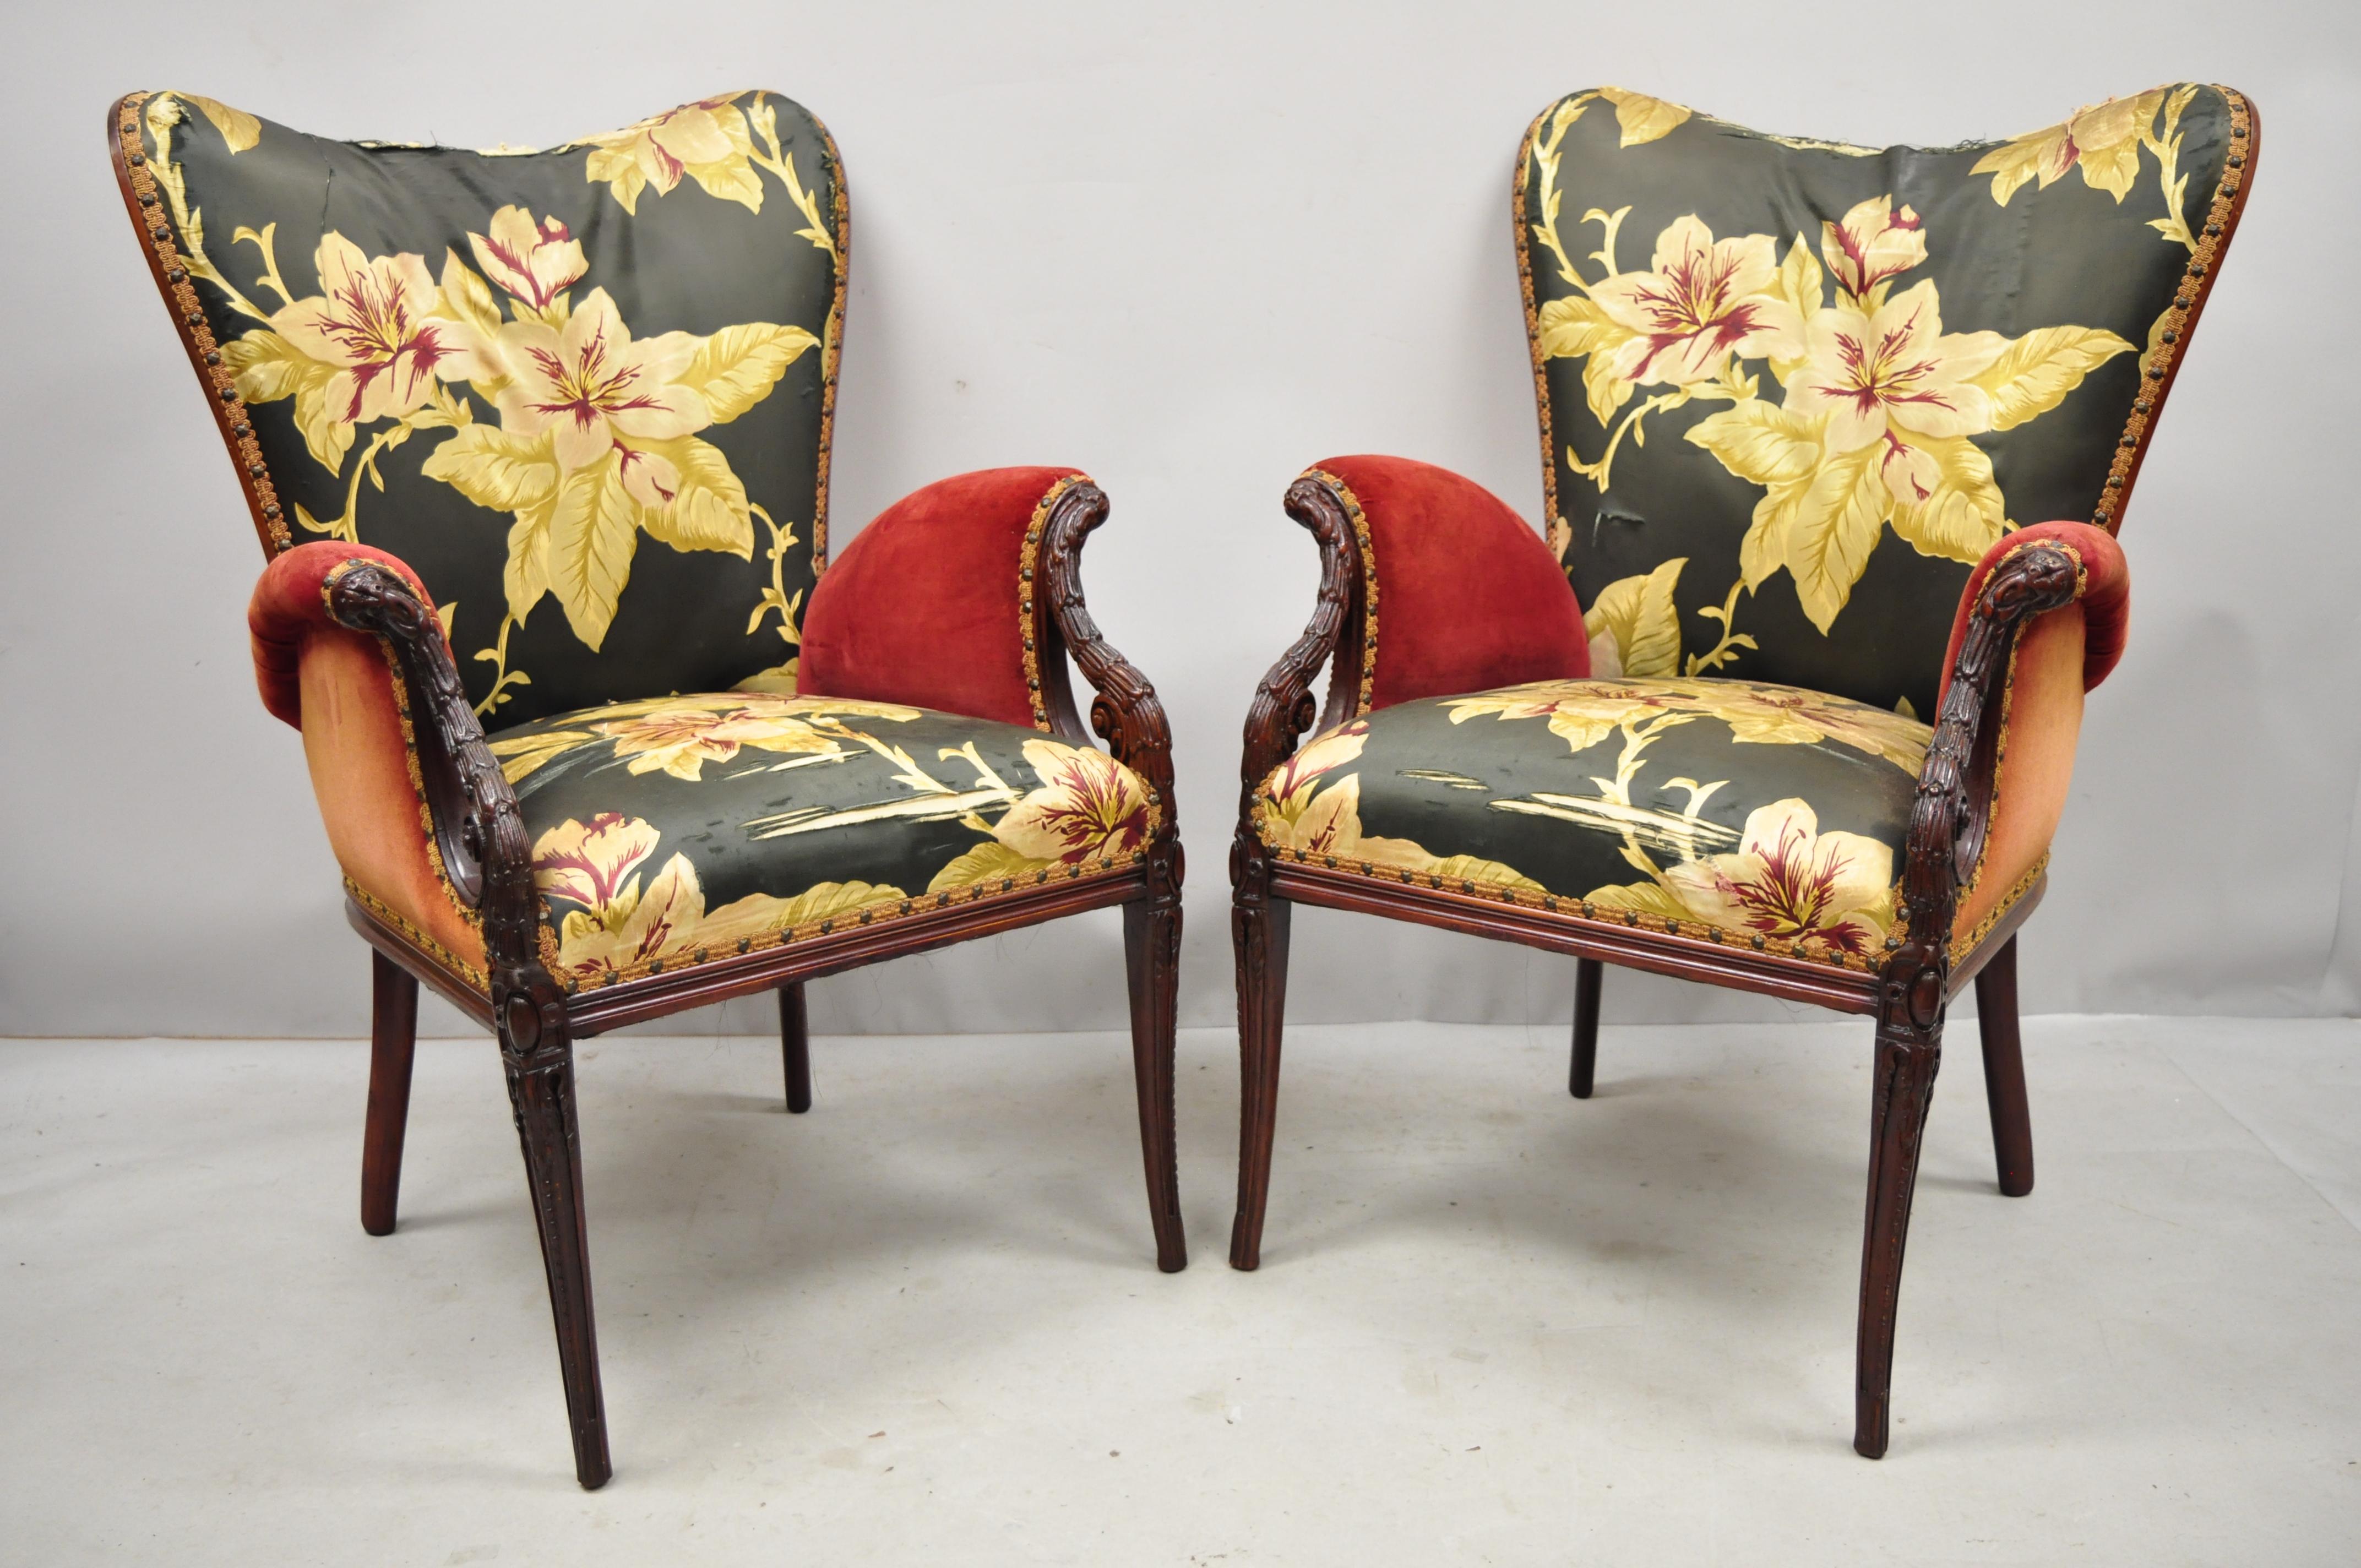 Pair of antique French Hollywood Regency Wingback Grosfeld House style lounge armchairs. Listing includes a solid wood frame, nicely carved details, tapered legs, very nice antique item, great style and form, circa early 20th century. Measurements: